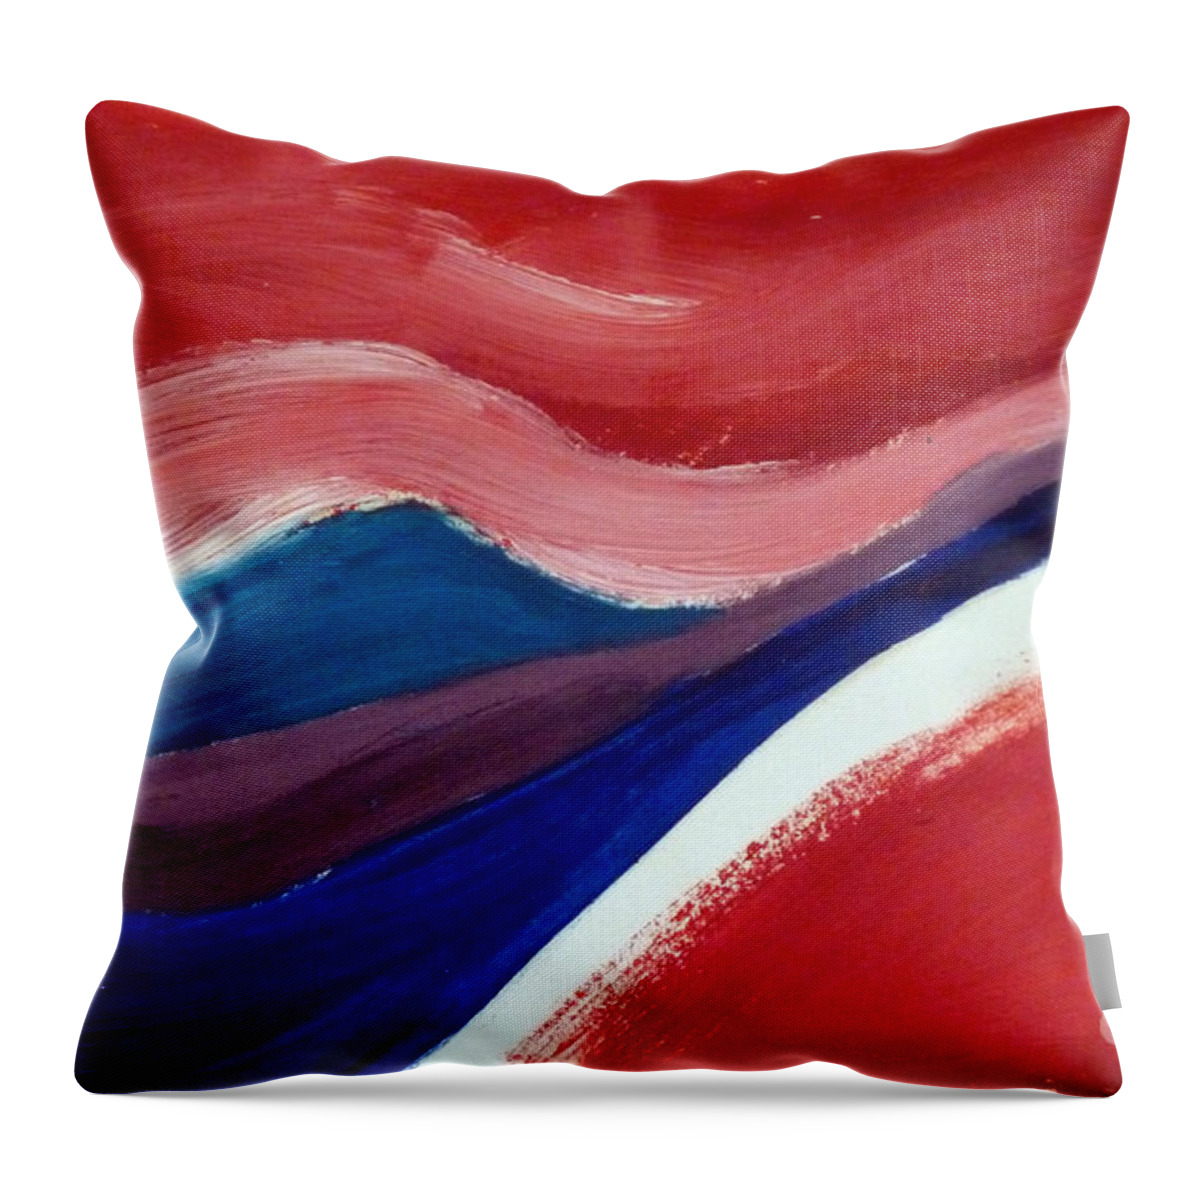 Red Throw Pillow featuring the painting Flow by Francesca Mackenney